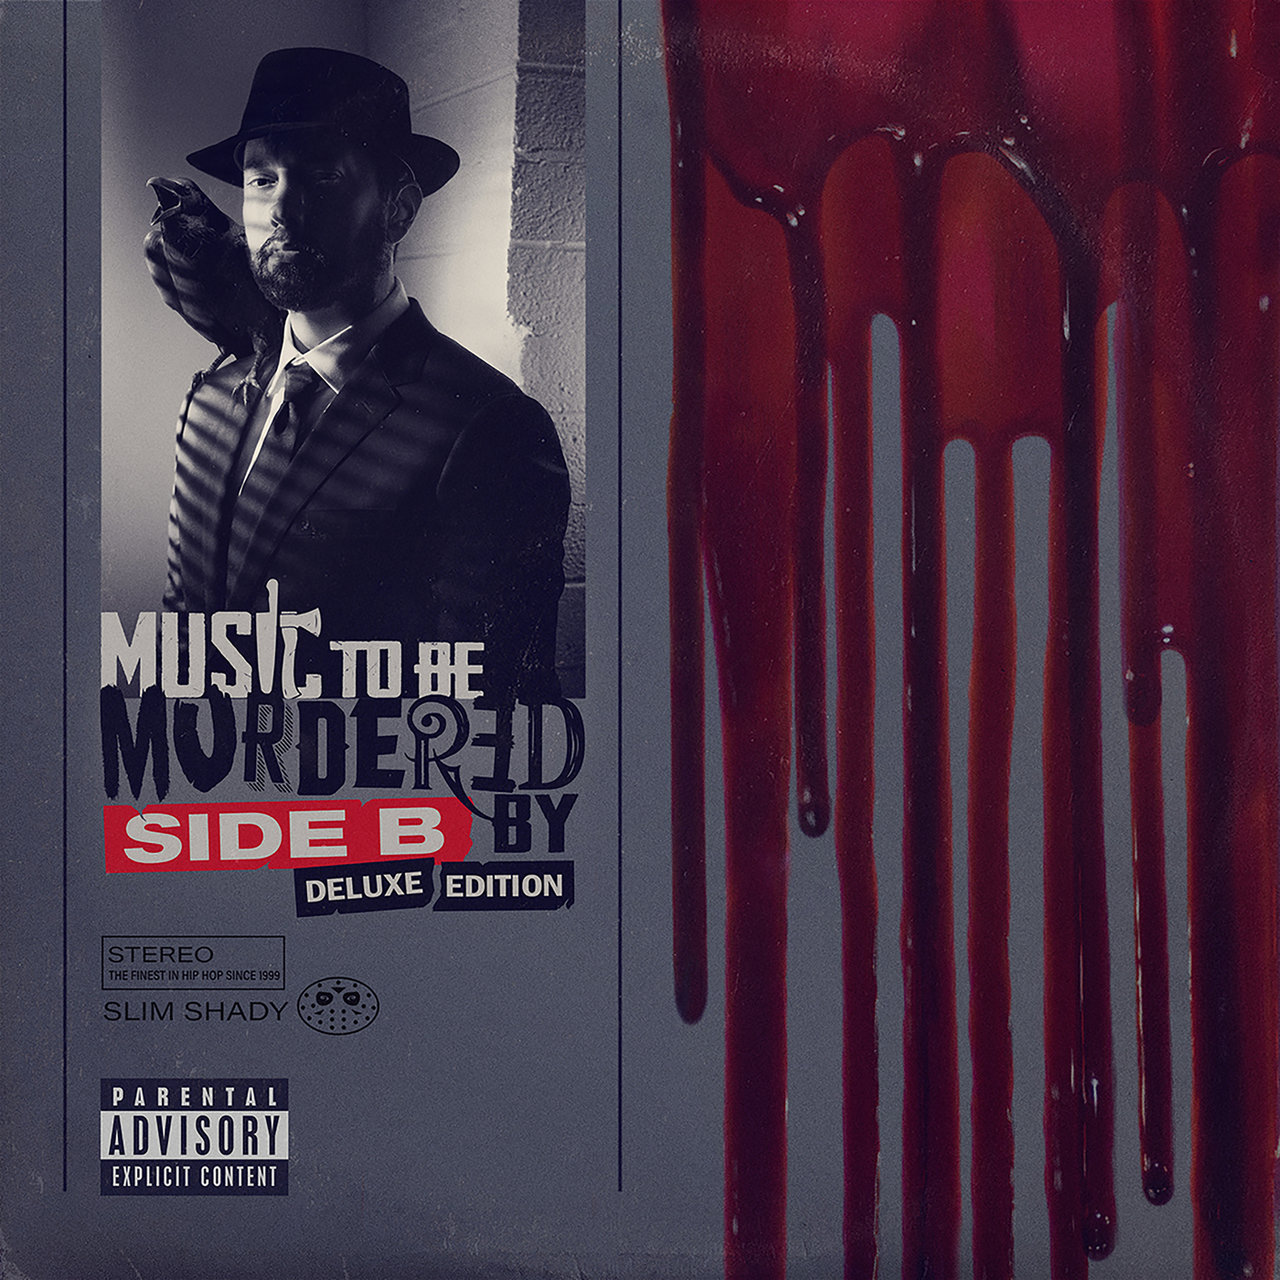 Eminem - Music To Be Murdered By - Side B (Deluxe Edition) (Cover)